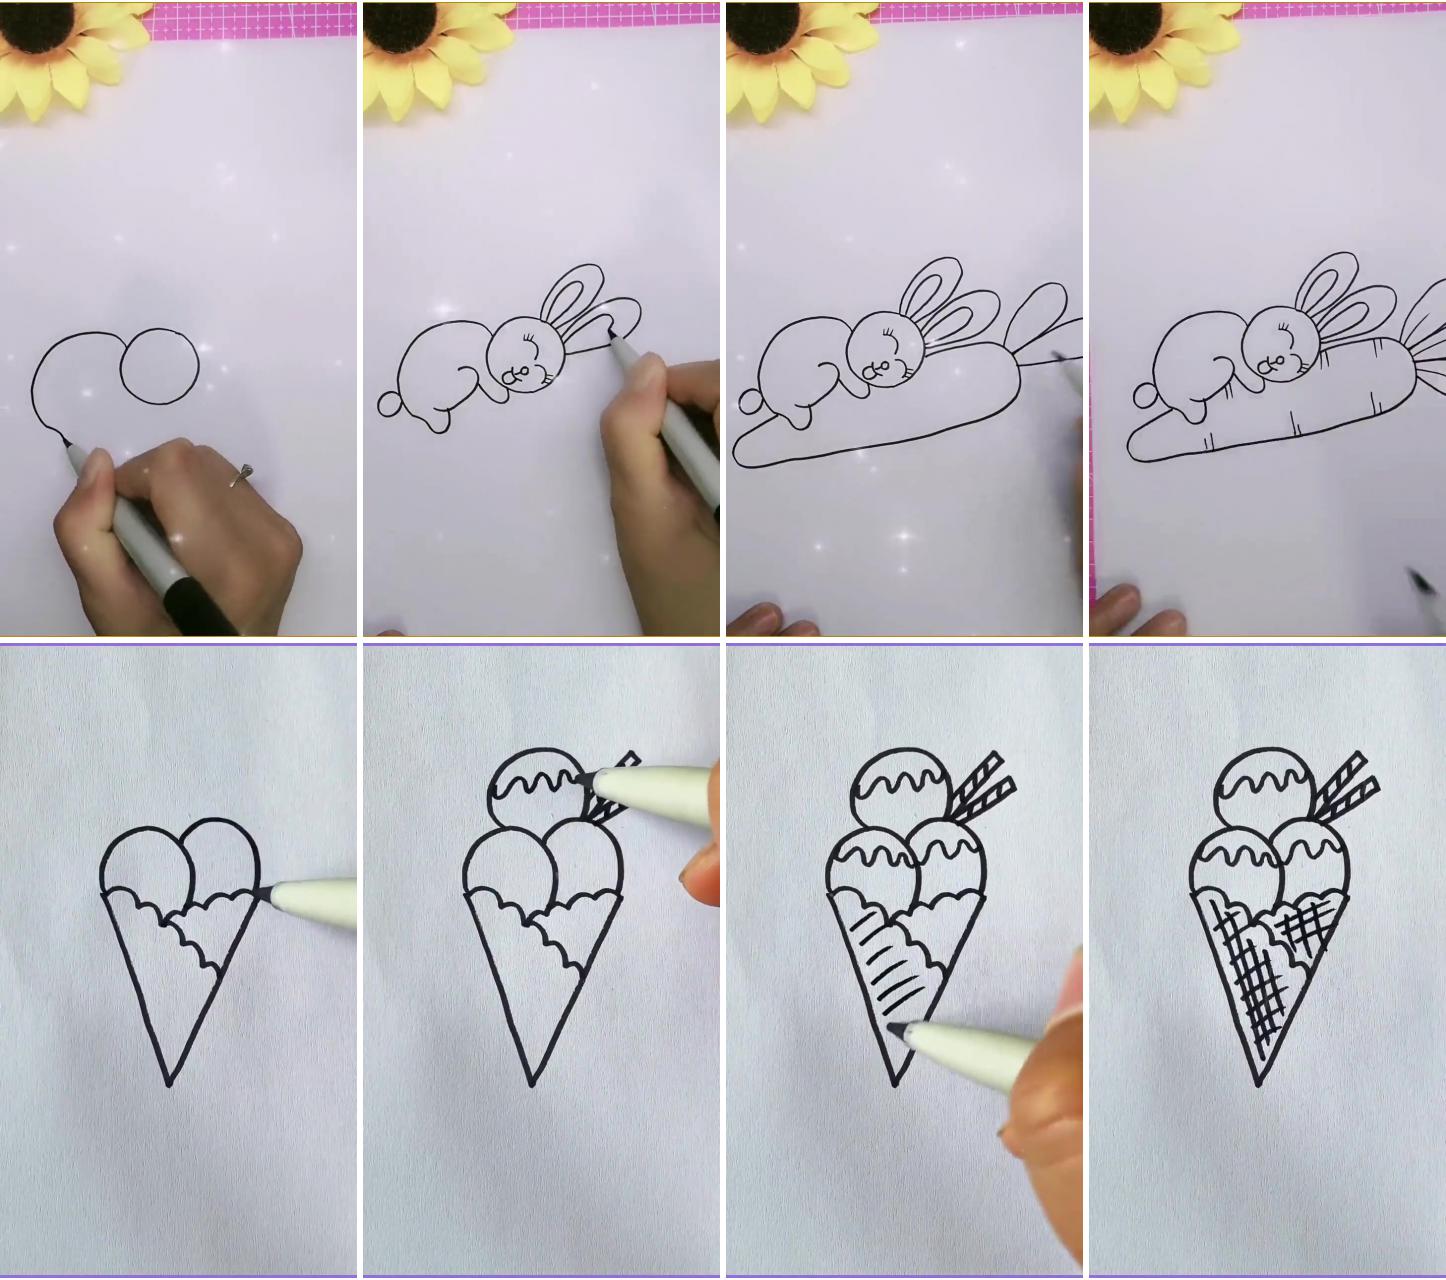 How to draw rabbit: step-by-step guide to drawing rabbit | free step-by-step tutorials on how to draw ice cream